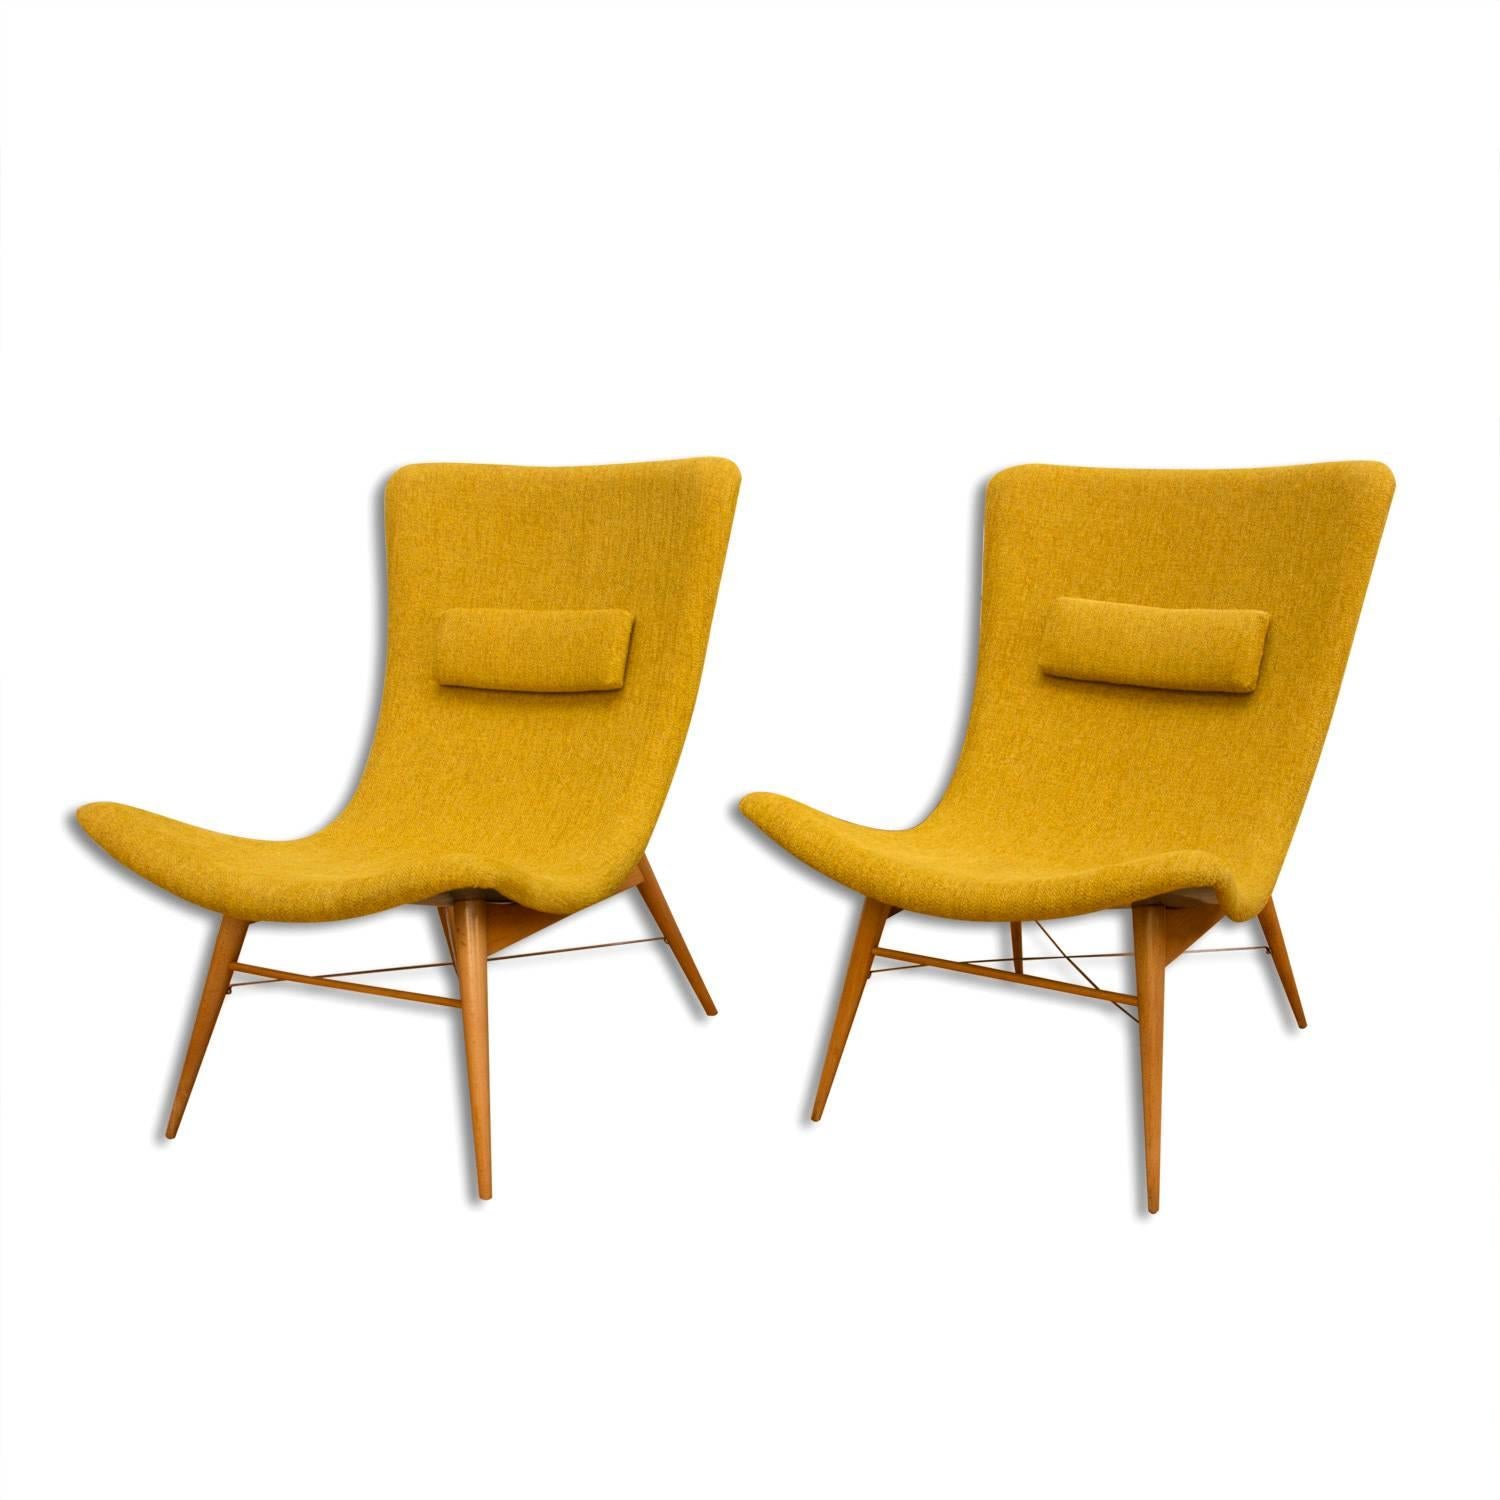 This pair of simple lounge chairs was designed in 1959 by Miroslav Navratil and produced by Ceský Nábytek for the Trienalle in Milano. The seats are made of plastic laminate and have been professionally restored. They have been reupholstered and